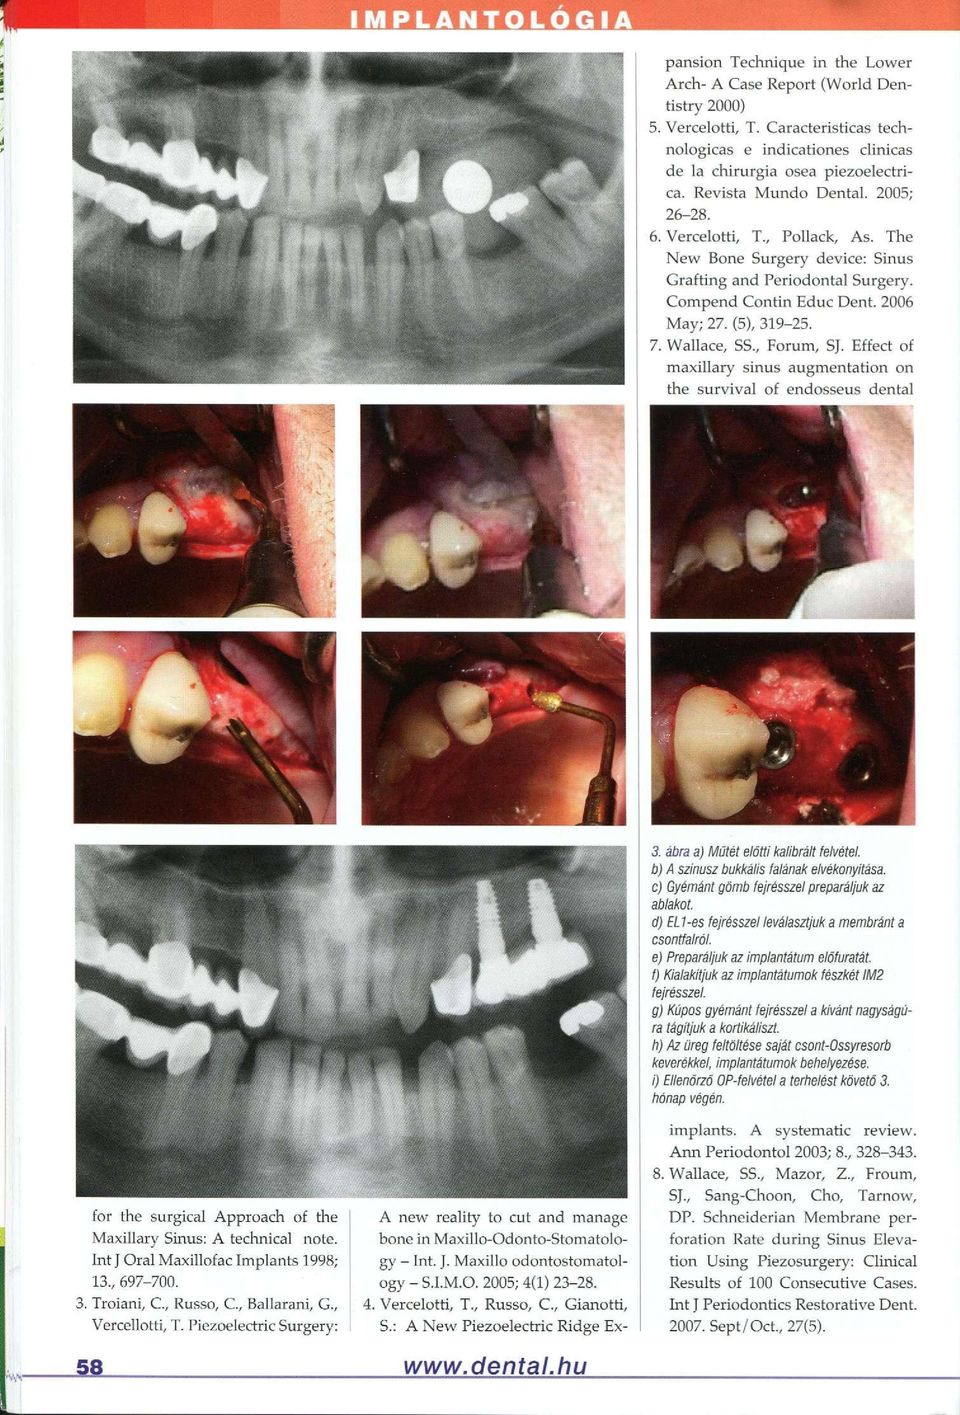 , Forum, SJ. Effect of maxillary sinus augmentation on the survival of endosseus dental for the surgical Approach of the Maxillary Sinus: A technical note. Int J Oral Maxillofac Implants 1998; 13.